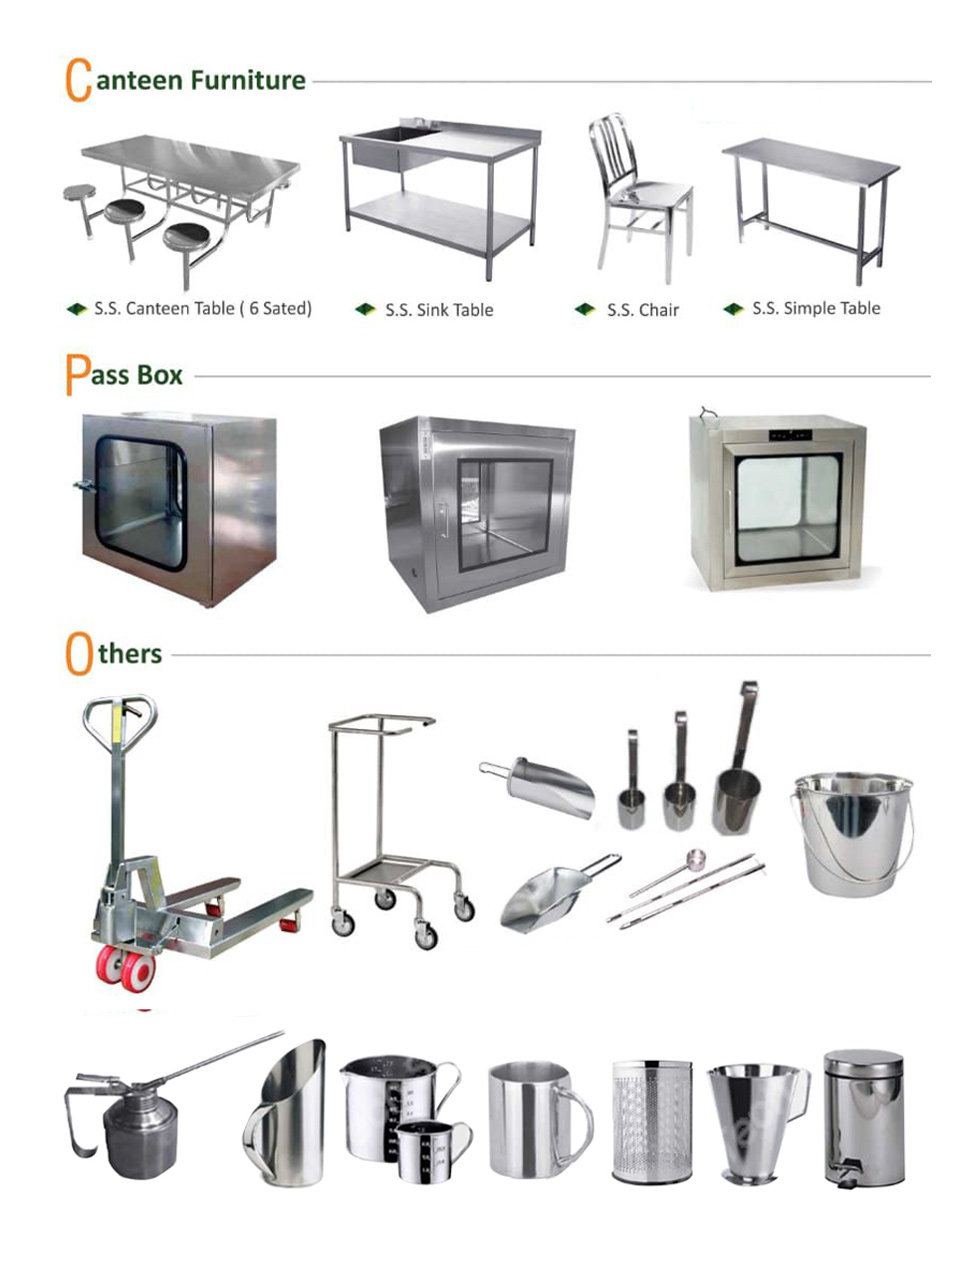 Clean Room Furniture, Canteen Pass Box & Others CRF, Supplier and Manufacturer in Ahmedabad, Gujarat, India